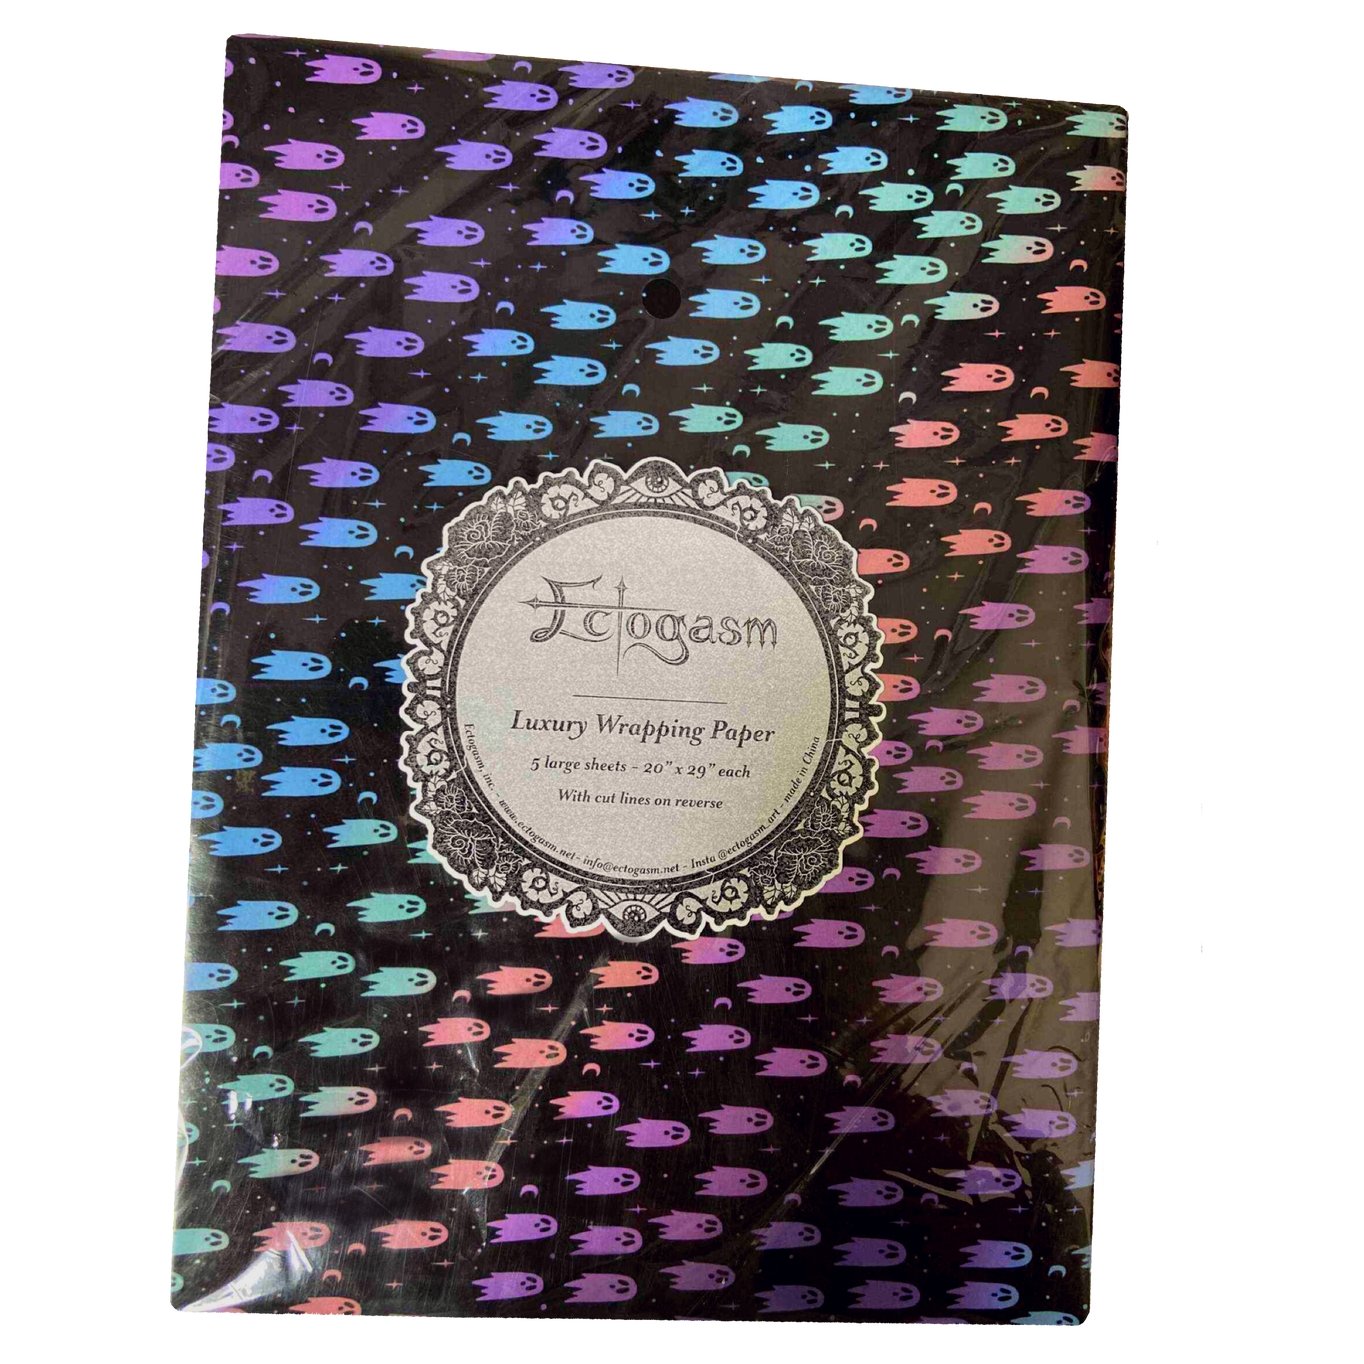 Ectogasm Rainbow Ghost Wrapping Paper